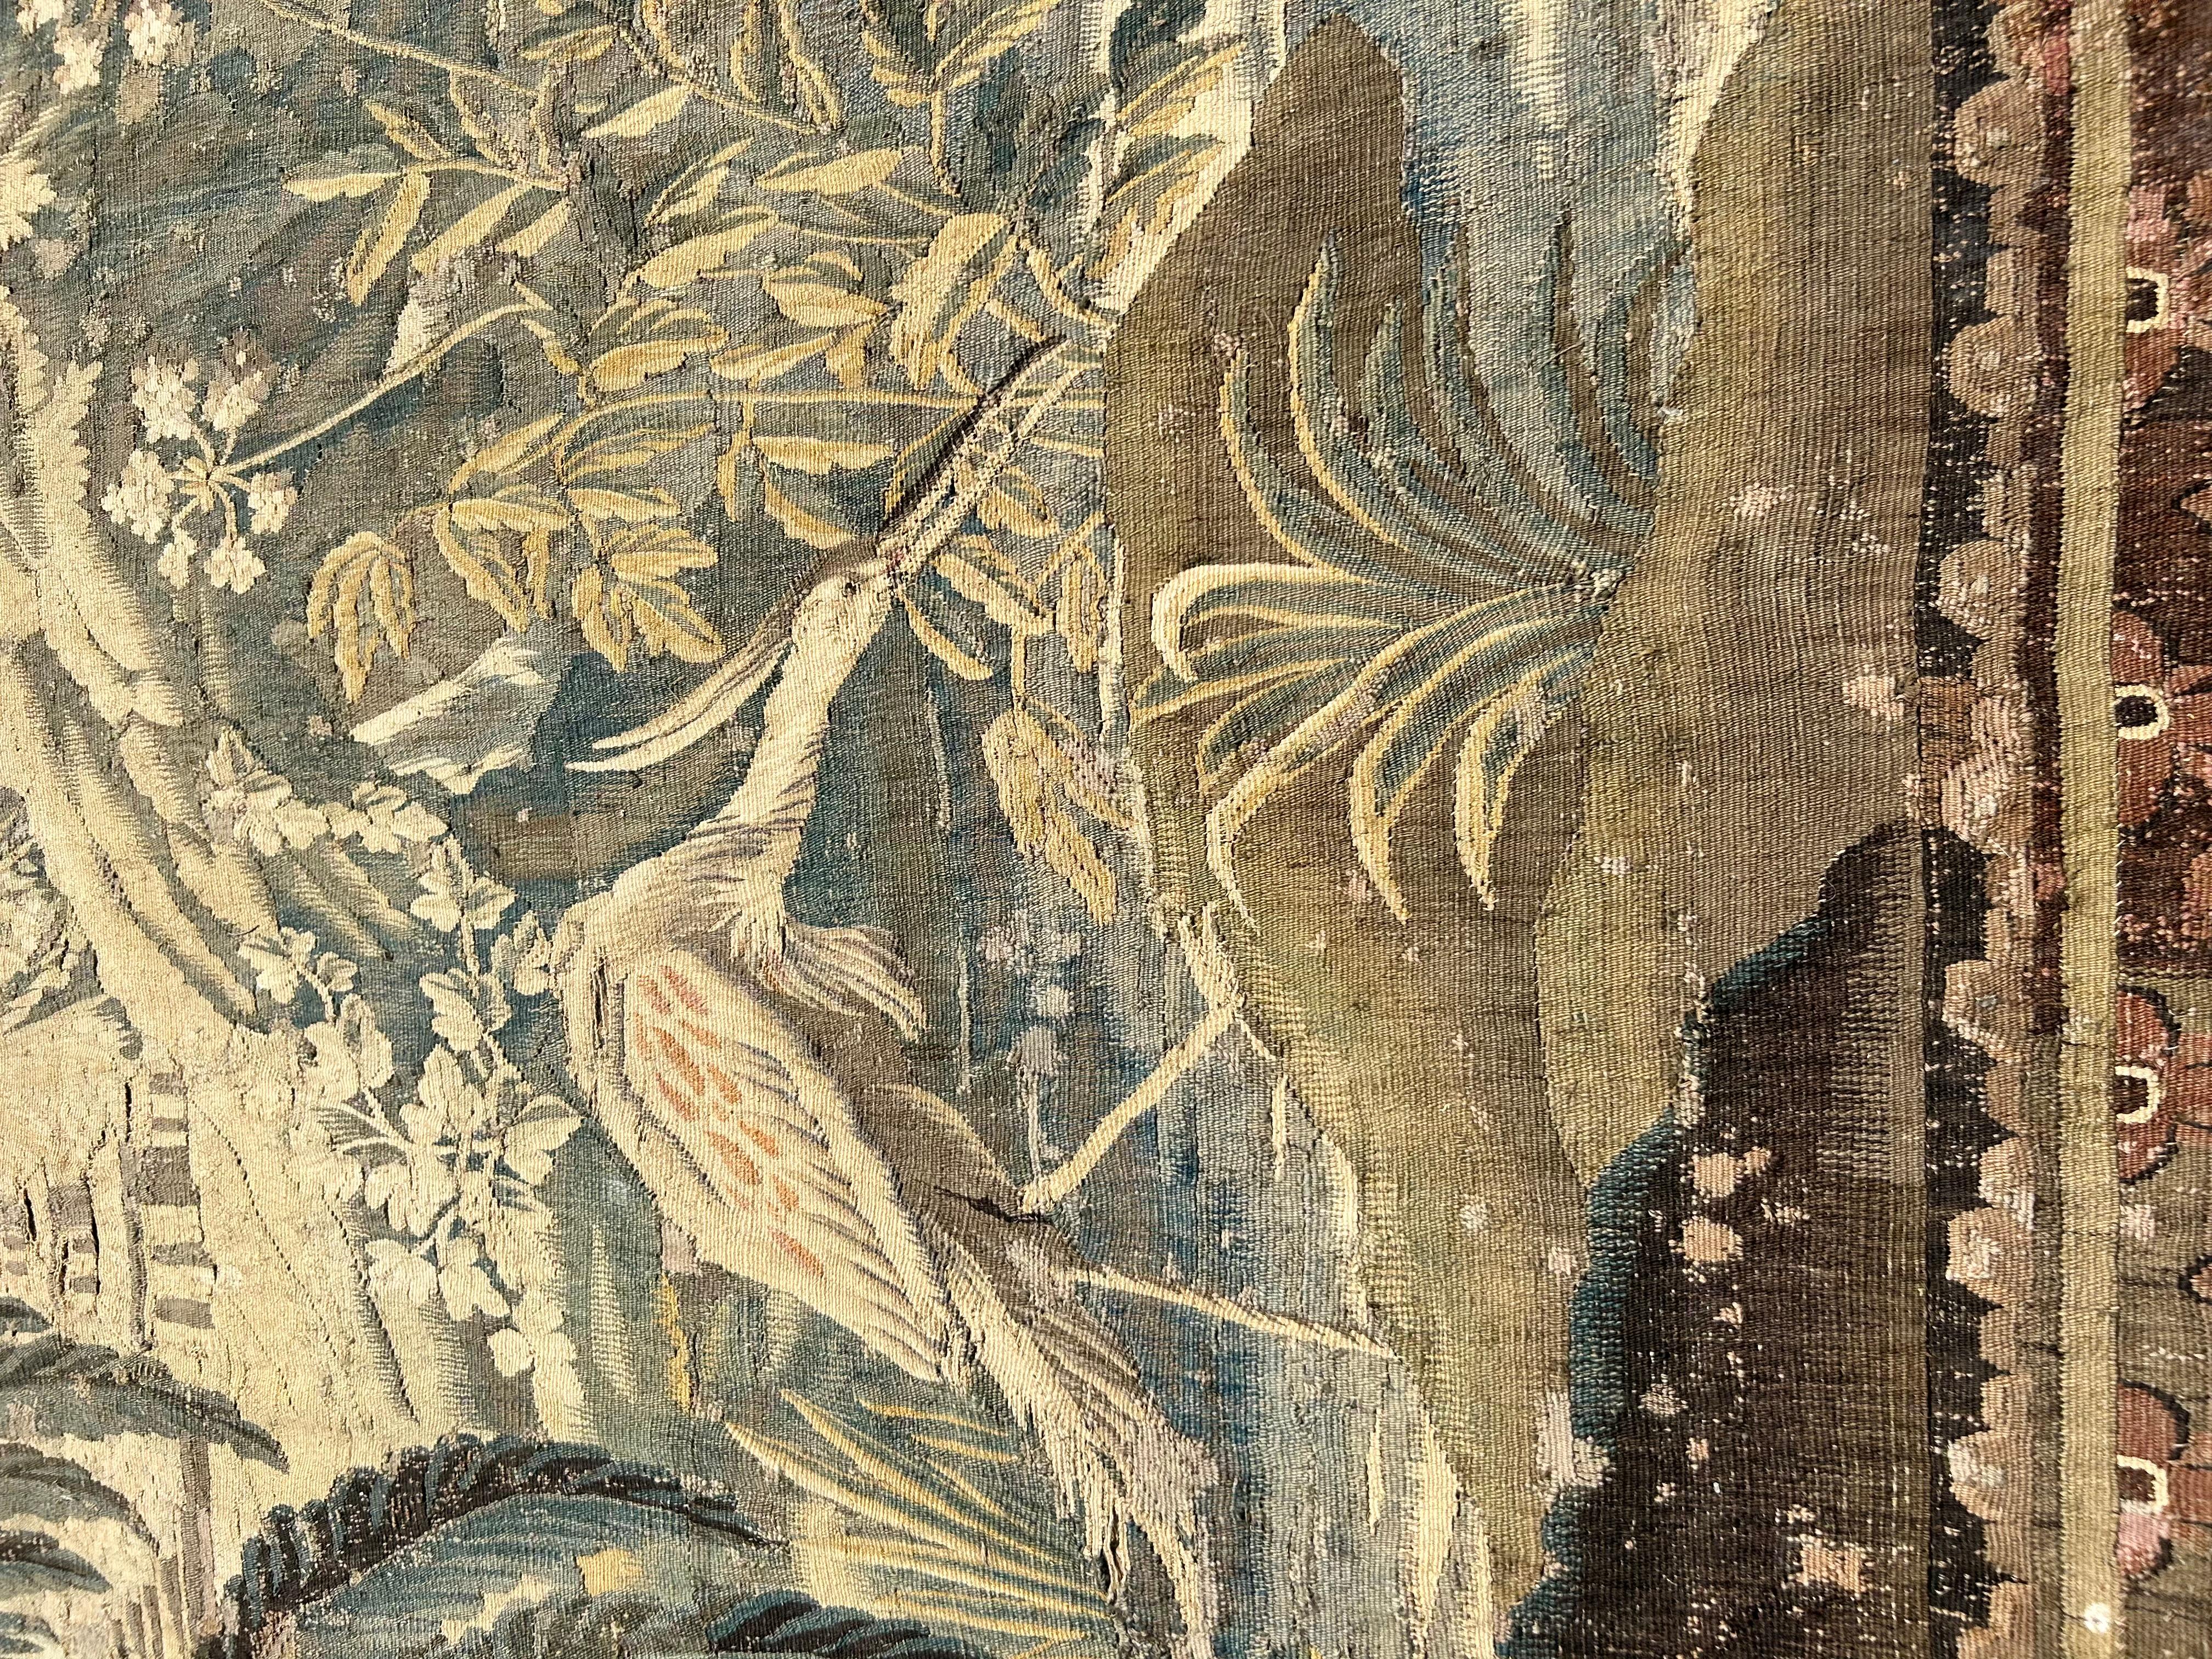 A Massive French 18th Century Aubusson Wool Tapestry with a picturesque scene with Antico Temples in a Palm Tree Landscape. Exotic Birds rest surrounded by water and lush fauna and foliage. In the background, there is a Chinese style pavilion and a